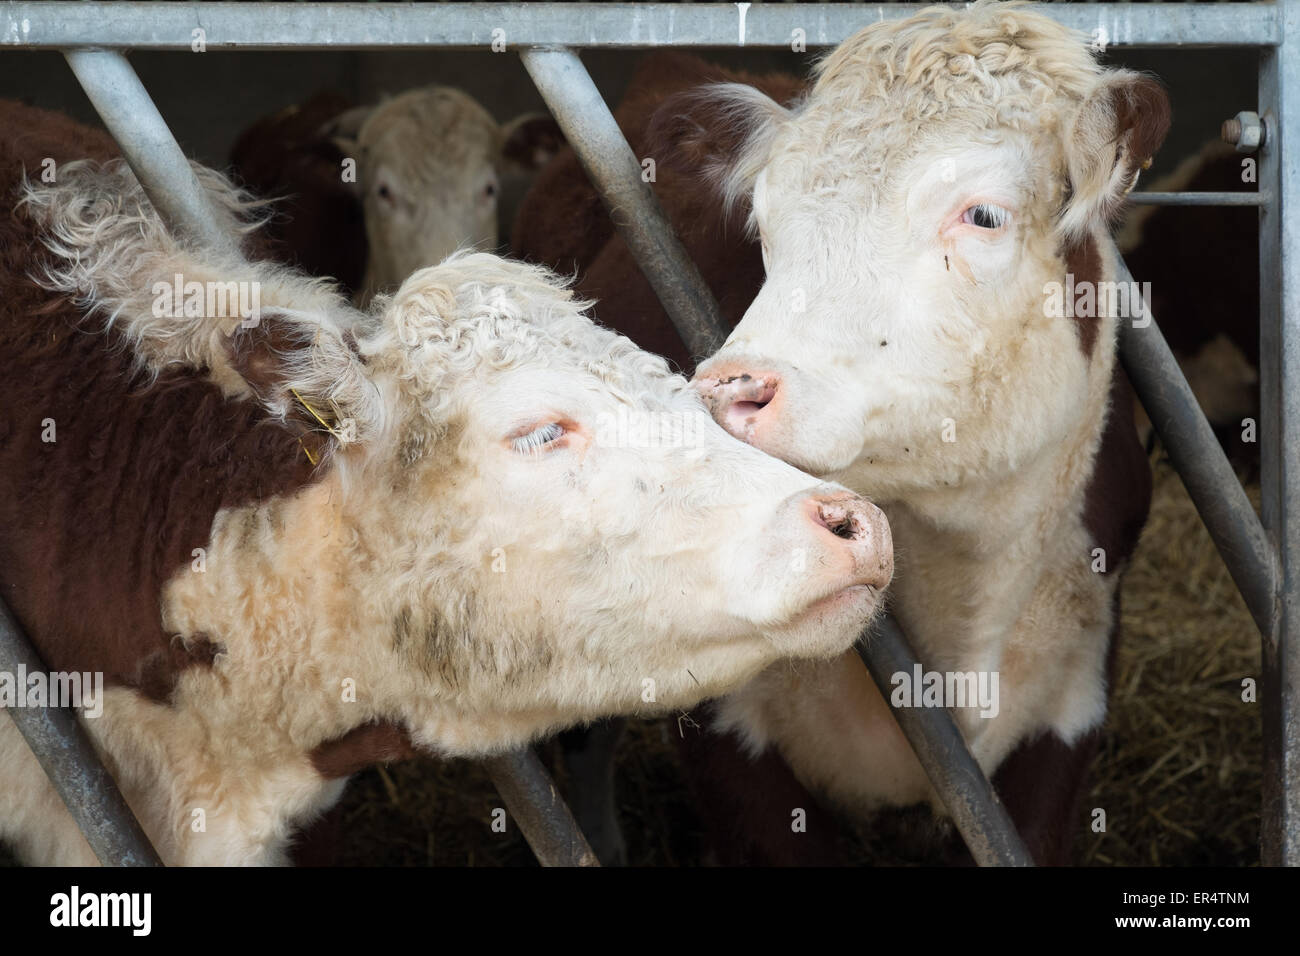 https://c8.alamy.com/comp/ER4TNM/close-up-of-two-cows-in-a-pen-in-a-barn-sandwell-birmingham-england-ER4TNM.jpg